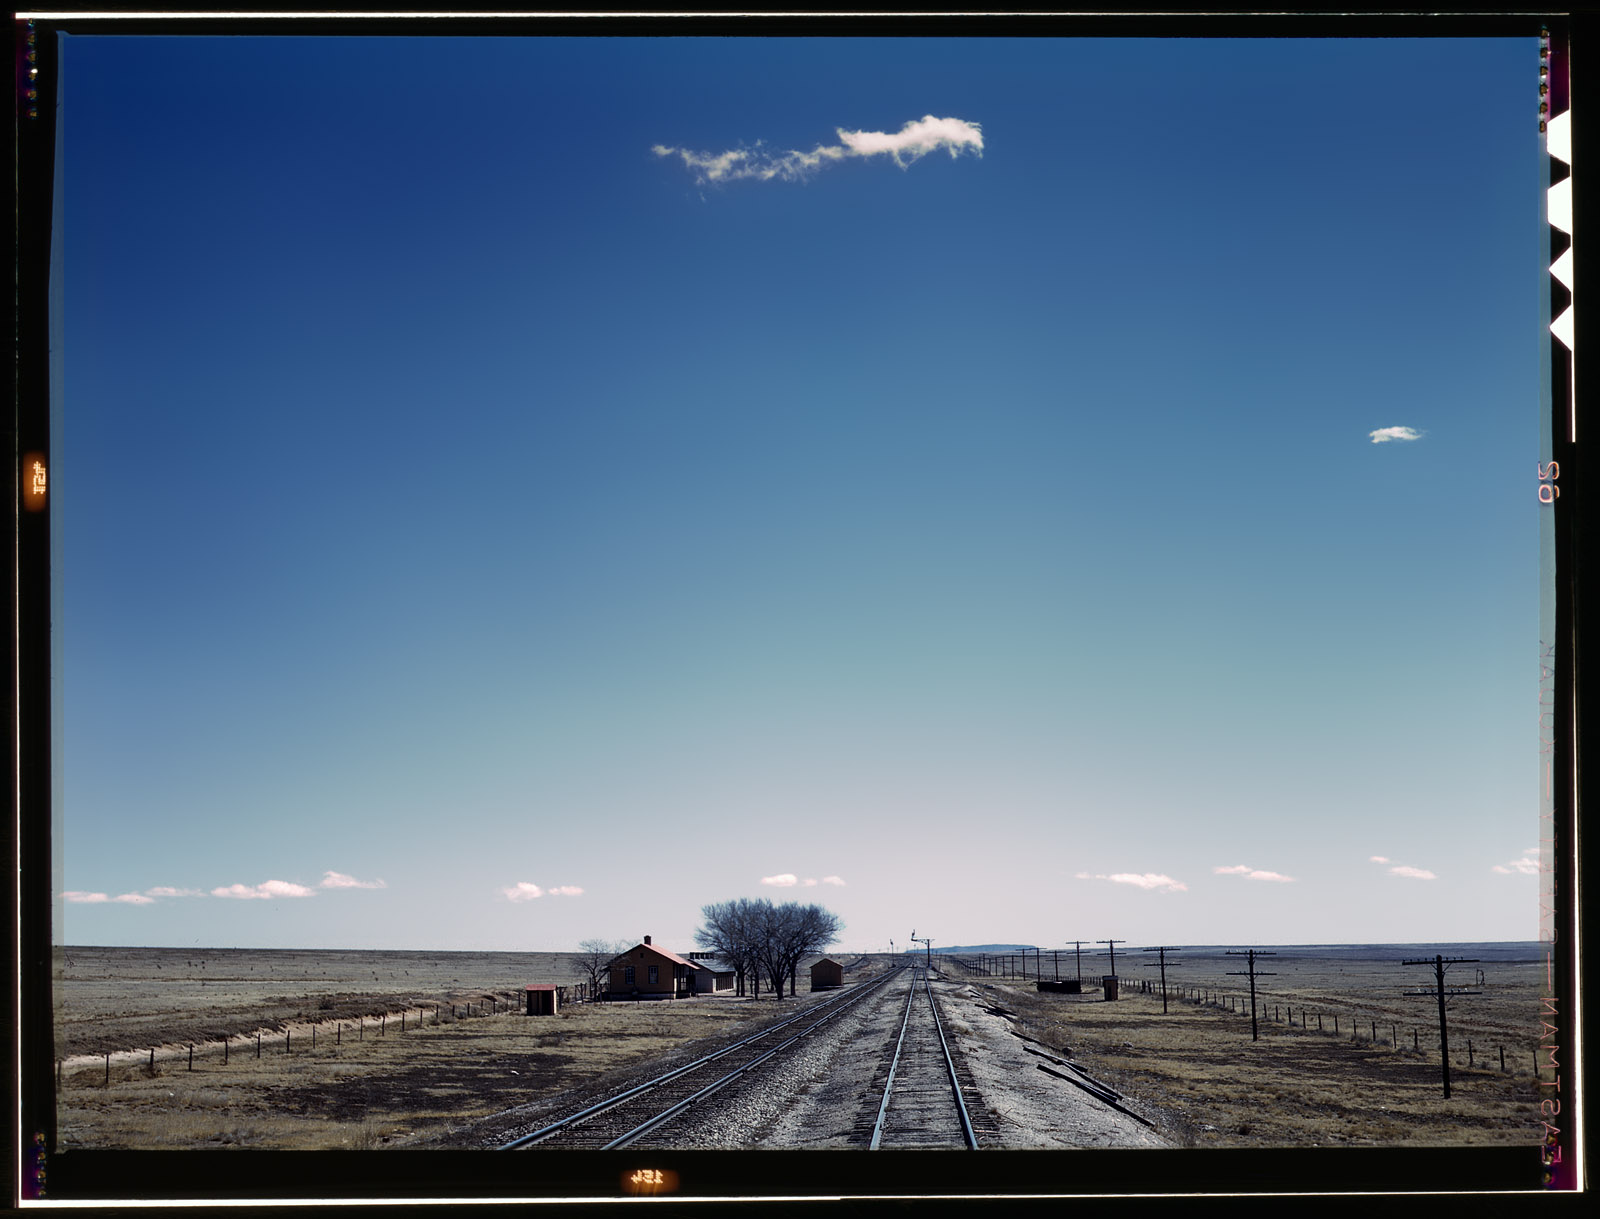 Santa Fe R.R. trip, March 1943. Section house along the Atchison, Topeka & Santa Fe Railroad in the vicinity of Encino, New Mexico. View full size. 4x5 Kodachrome transparency by Jack Delano for the Office of War Information.